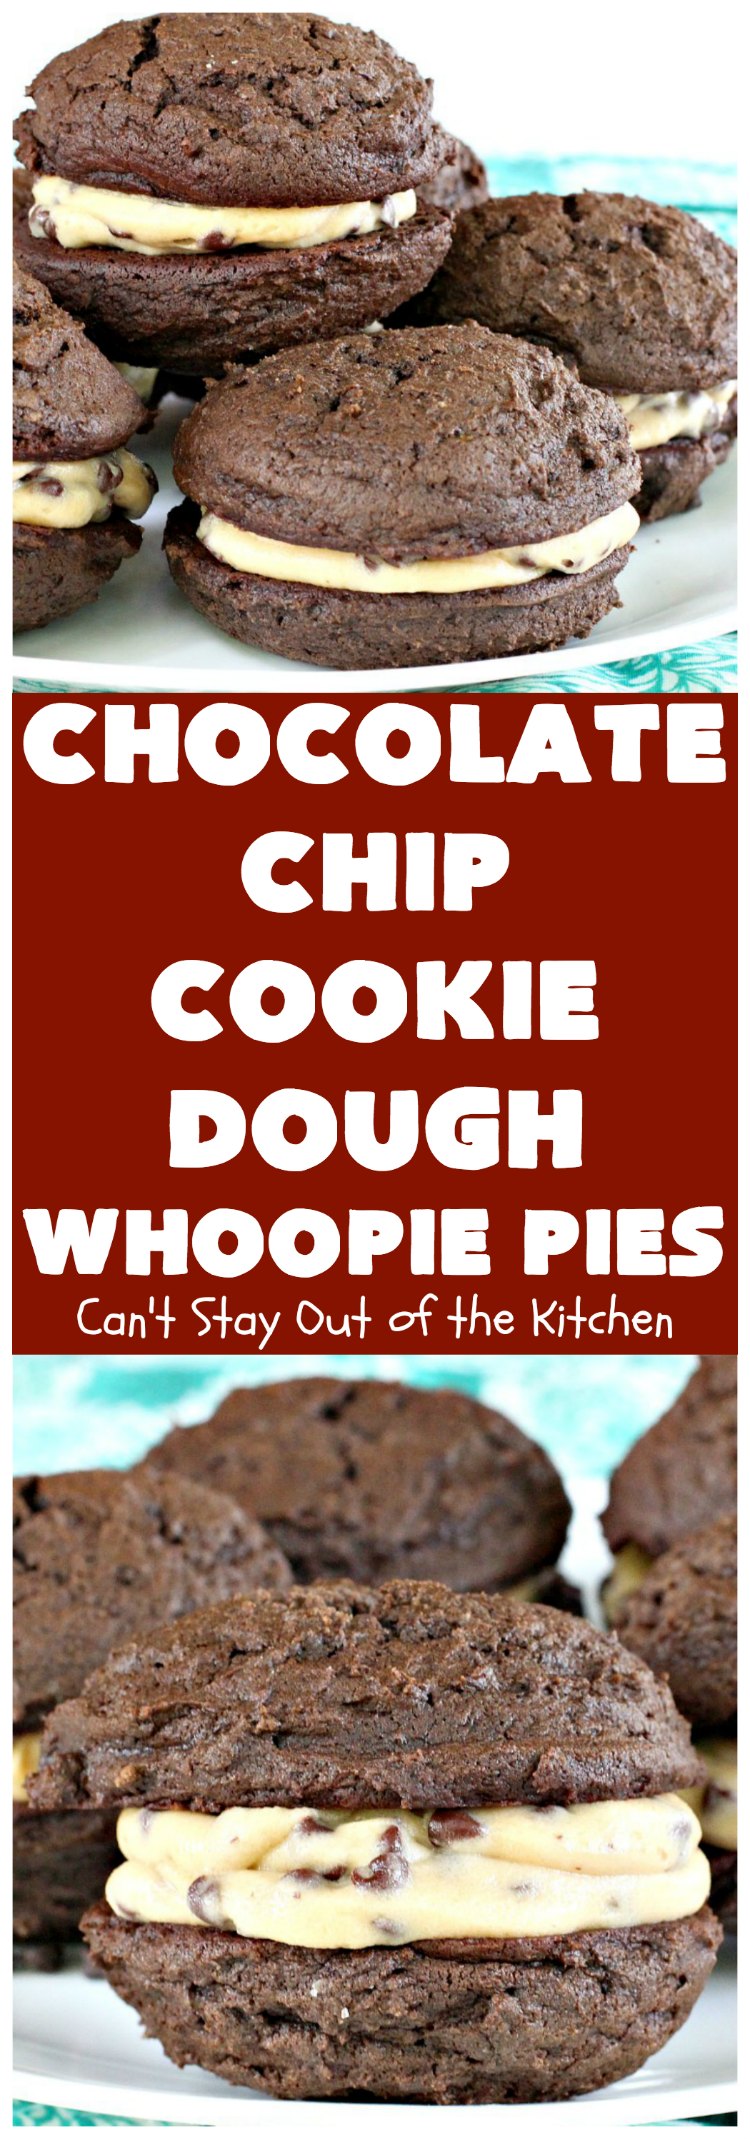 Chocolate Chip Cookie Dough Whoopie Pies | Can't Stay Out of the Kitchen